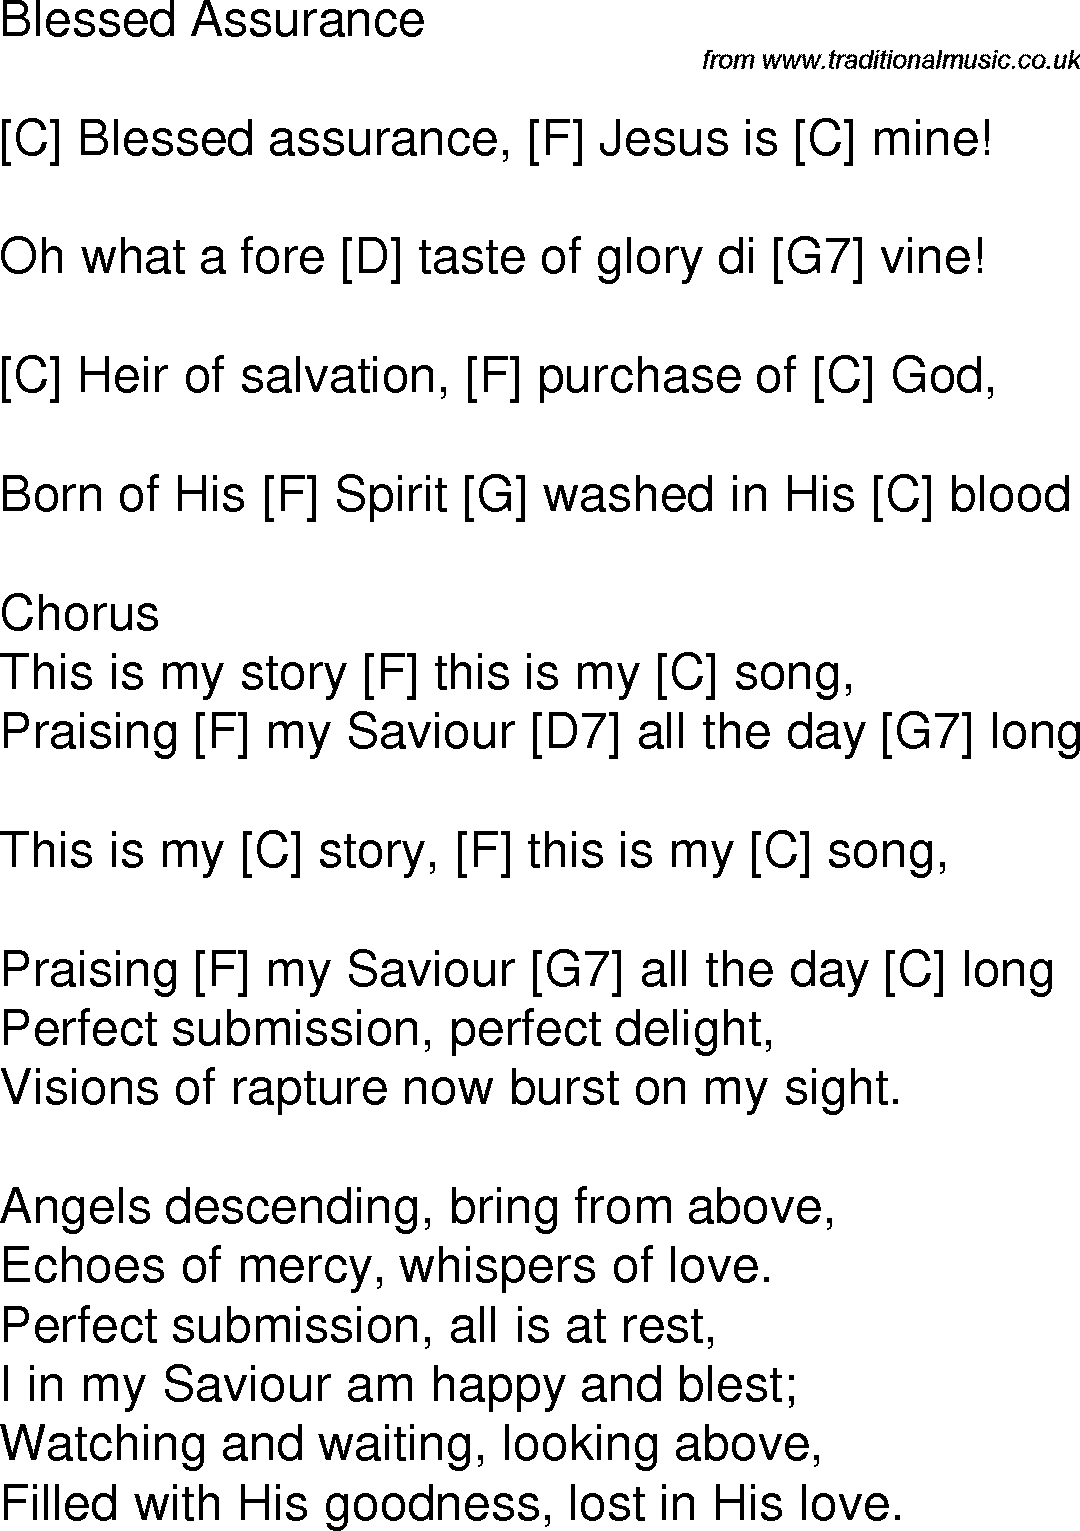 Old time song lyrics with chords for Blessed Assurance C